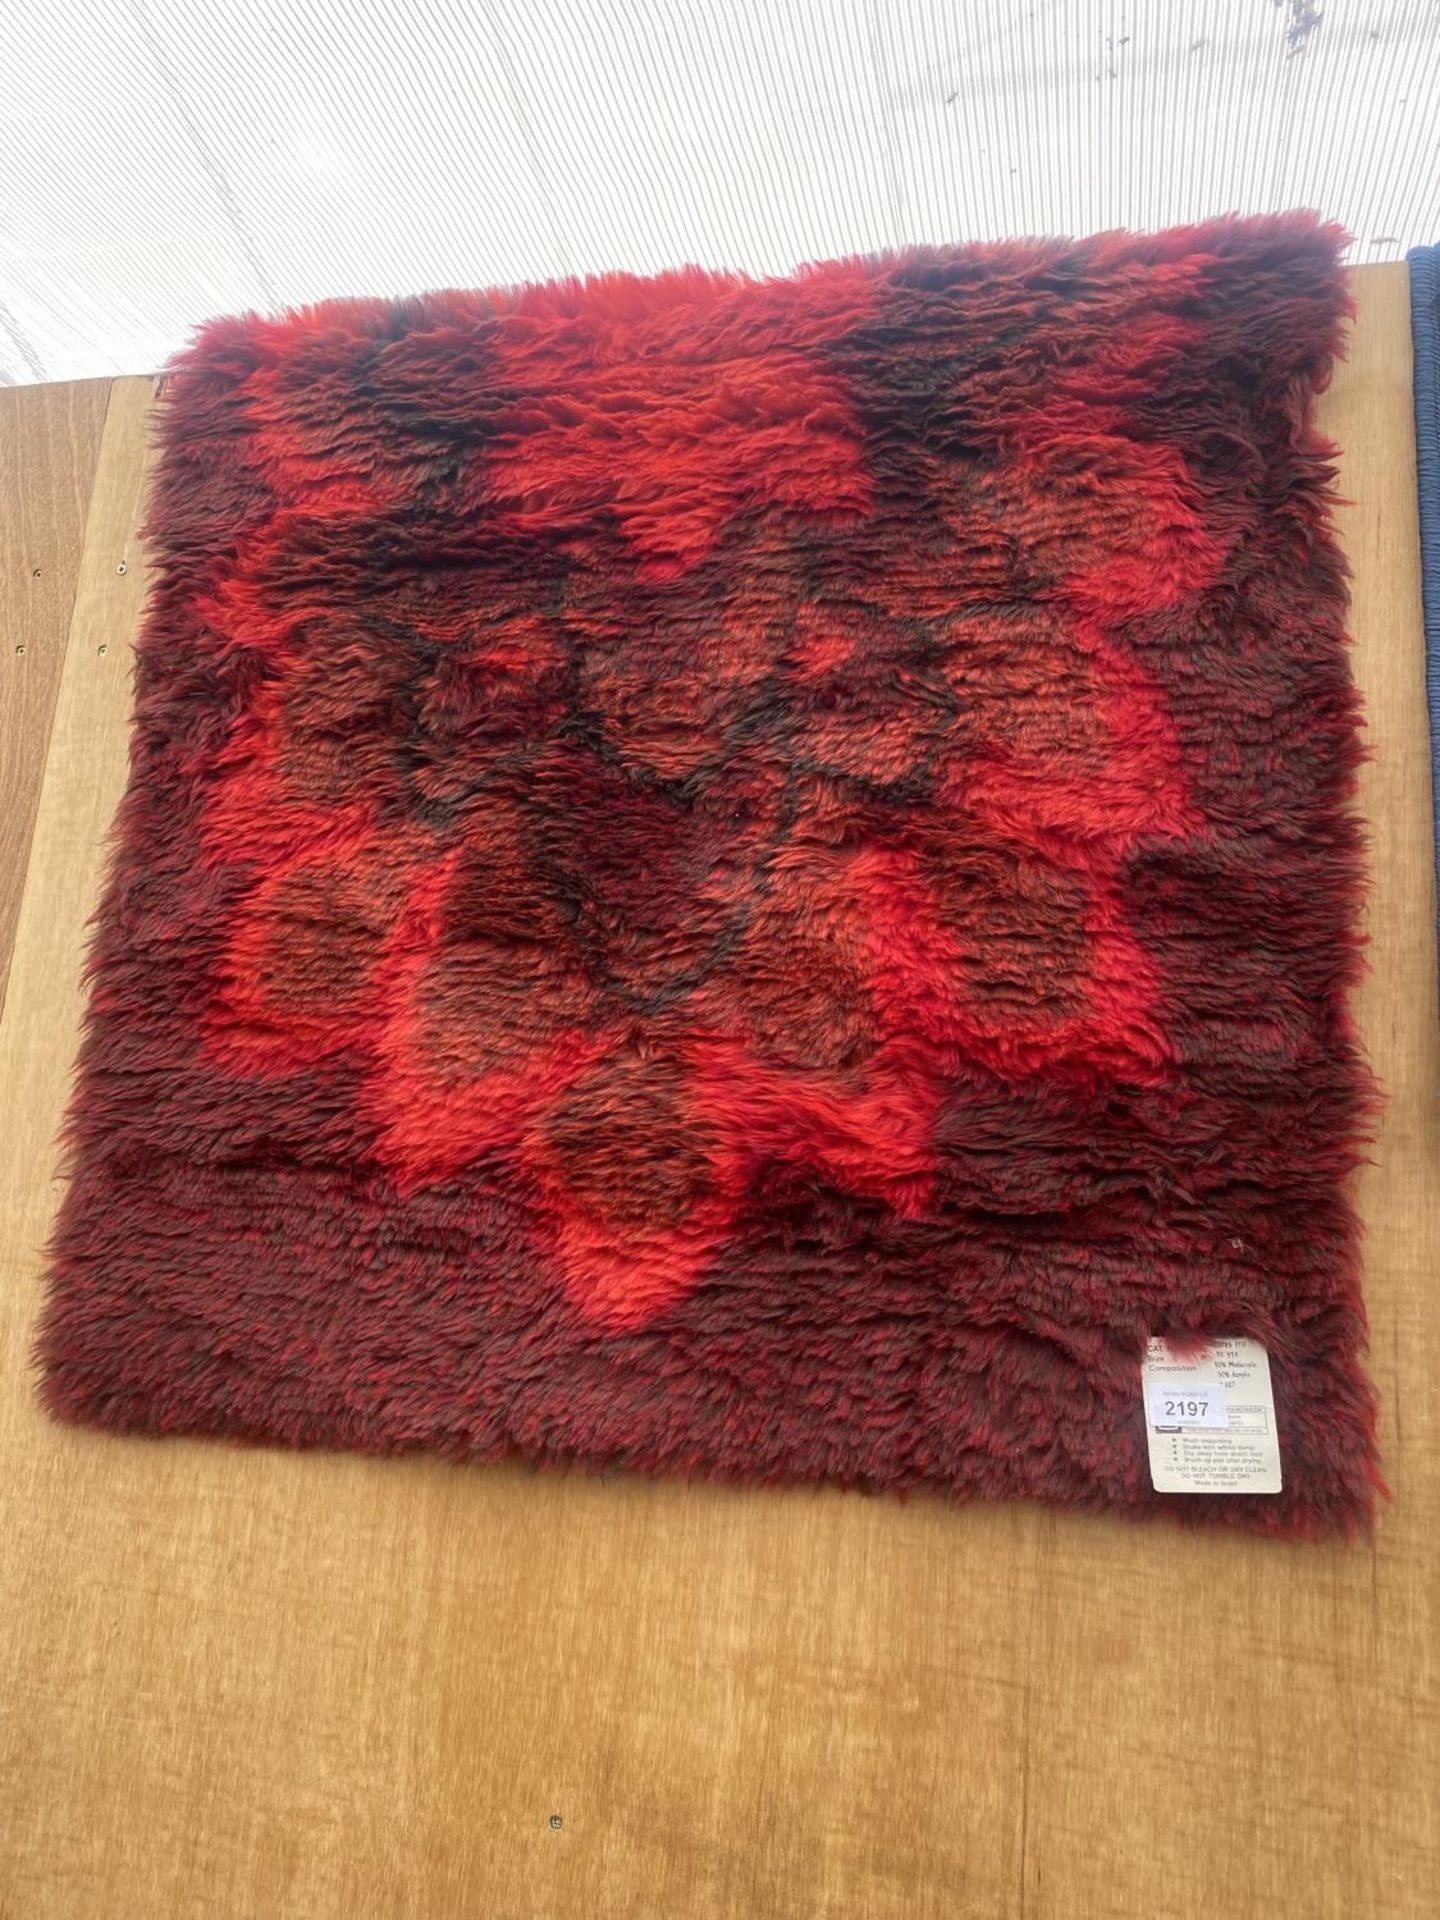 A MODERN RED RUG (30"X54") AND A BLUE PATTERNED RUG - Image 2 of 3